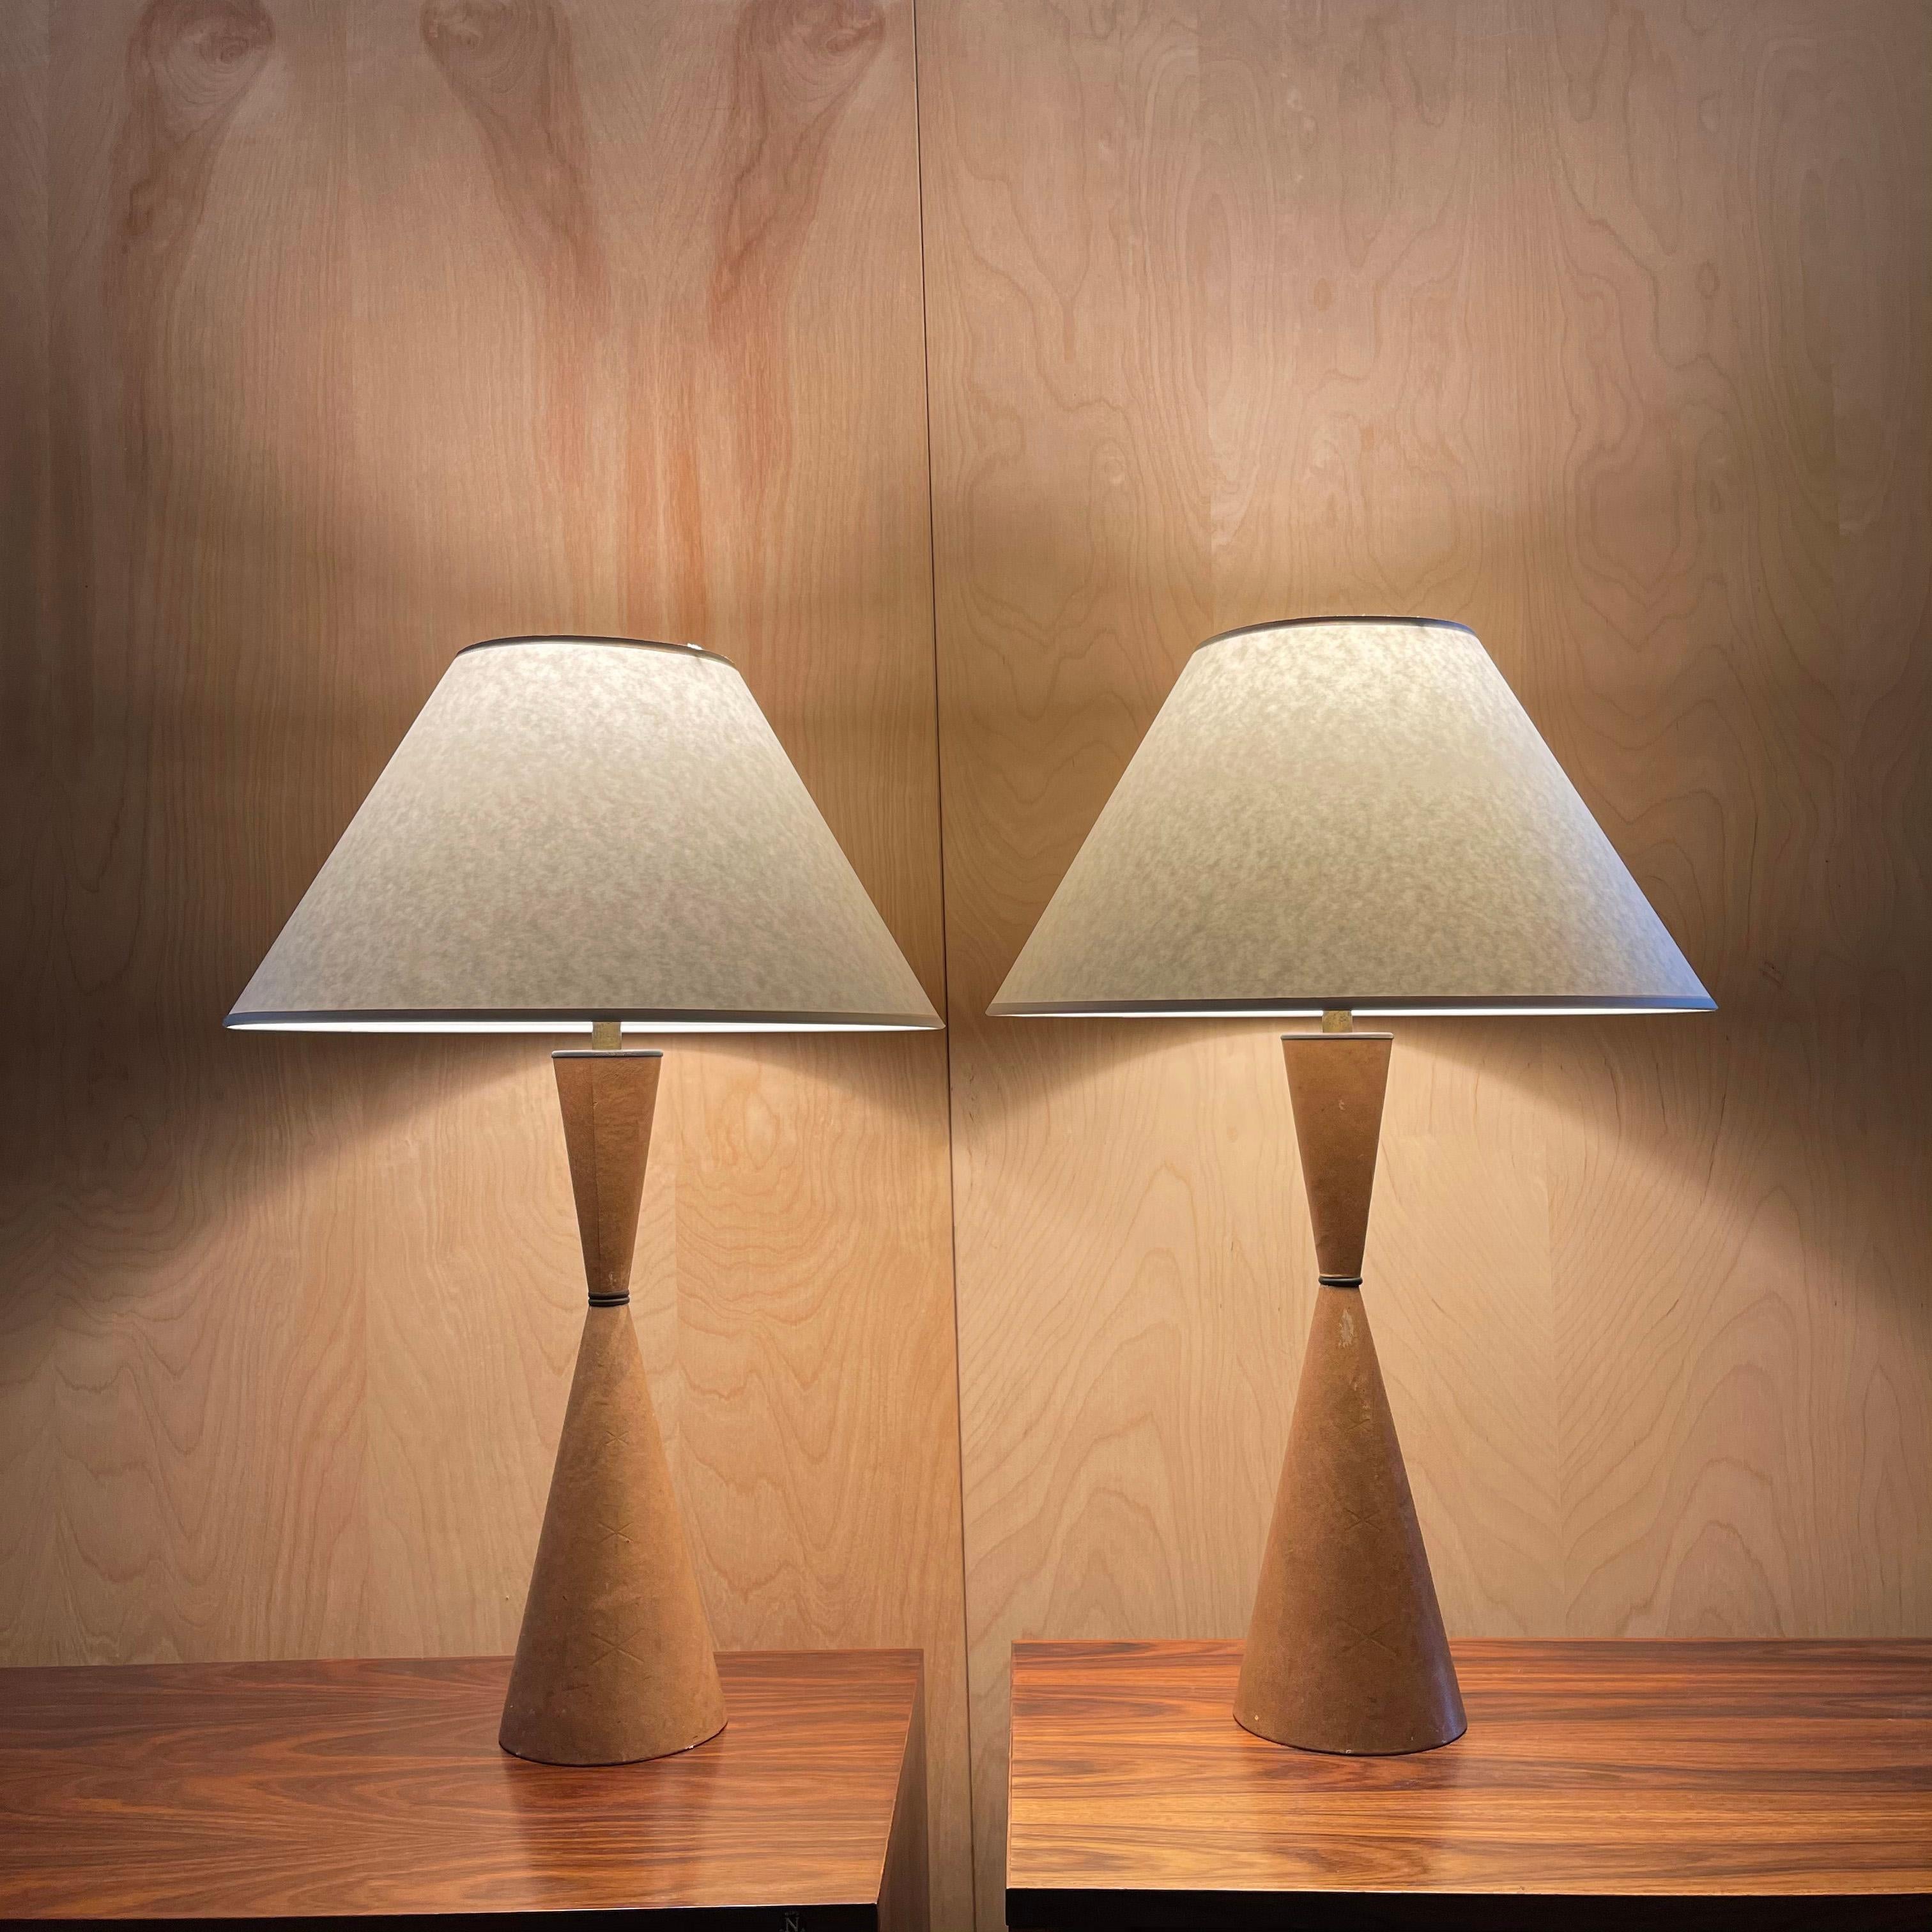 Pair of handsome, Mid-Century Modern, table lamps feature embossed leather, hourglass shaped bases with brass necks and tapered, coolie paper shades that measure 18 diameter x 10 ht inches.